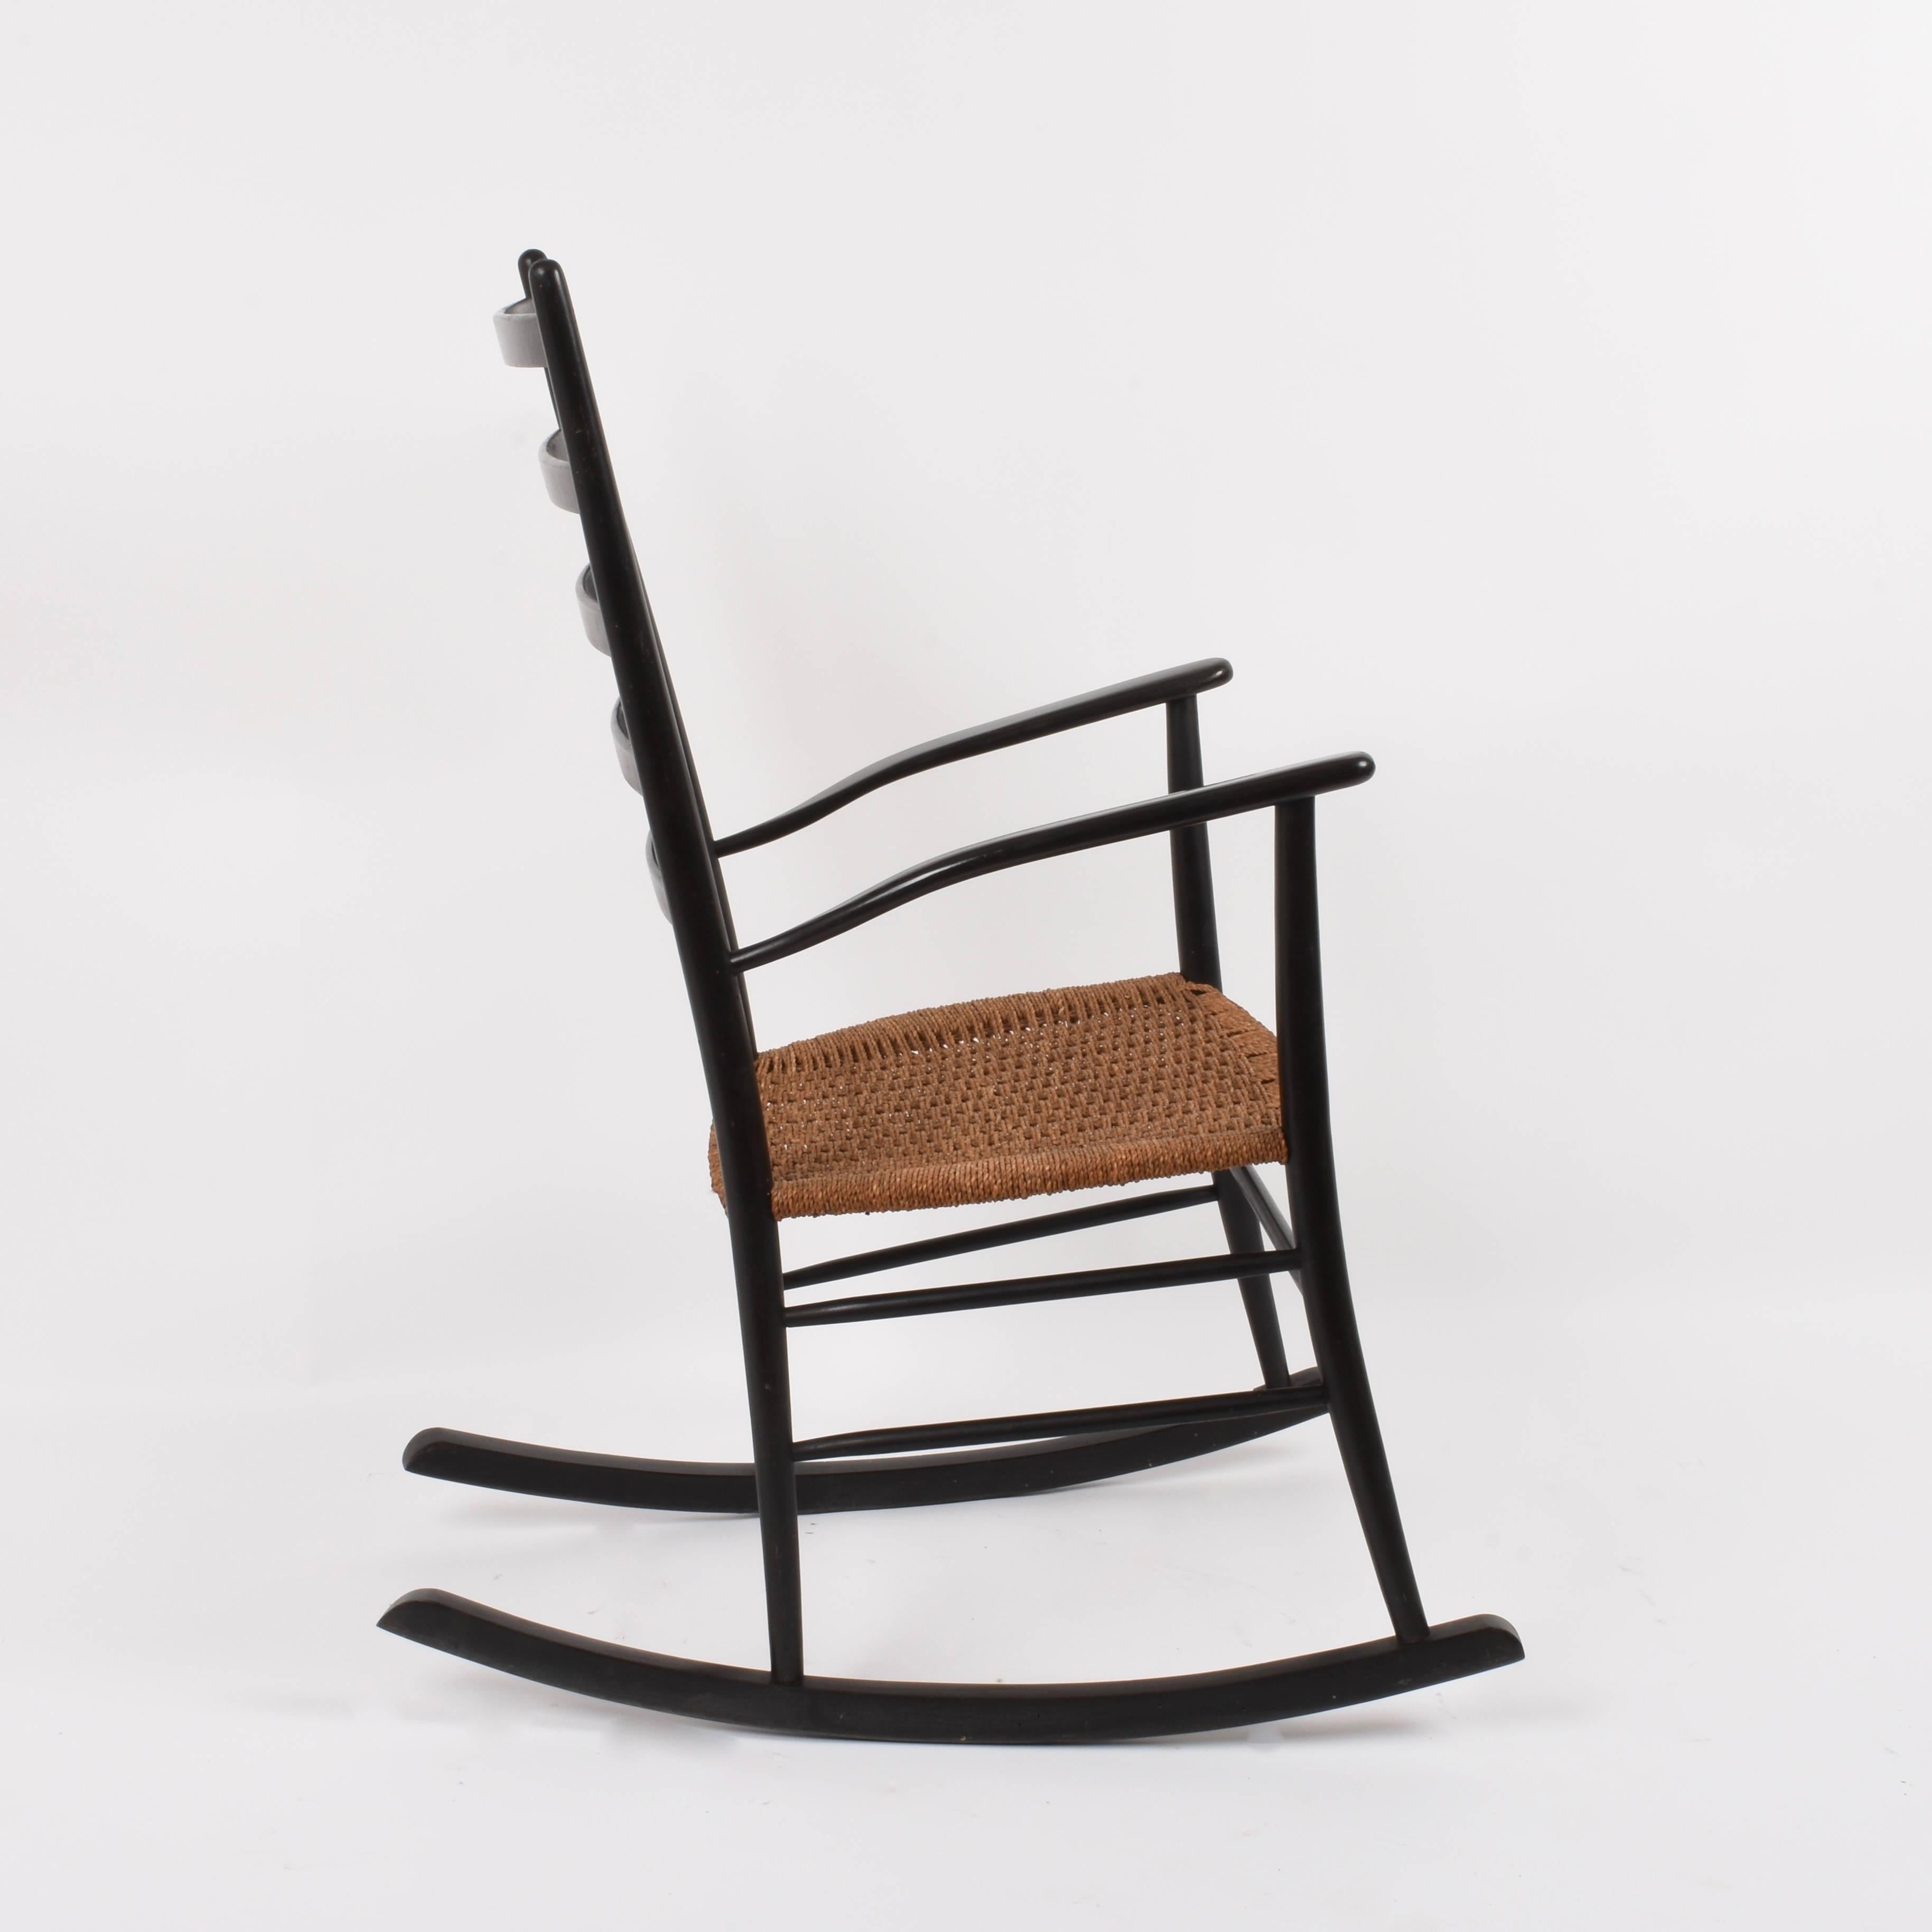 Midcentury Black Wood Vintage Scandinavian Rocking Chair with Rope Seat, 1950s In Good Condition For Sale In Roma, IT